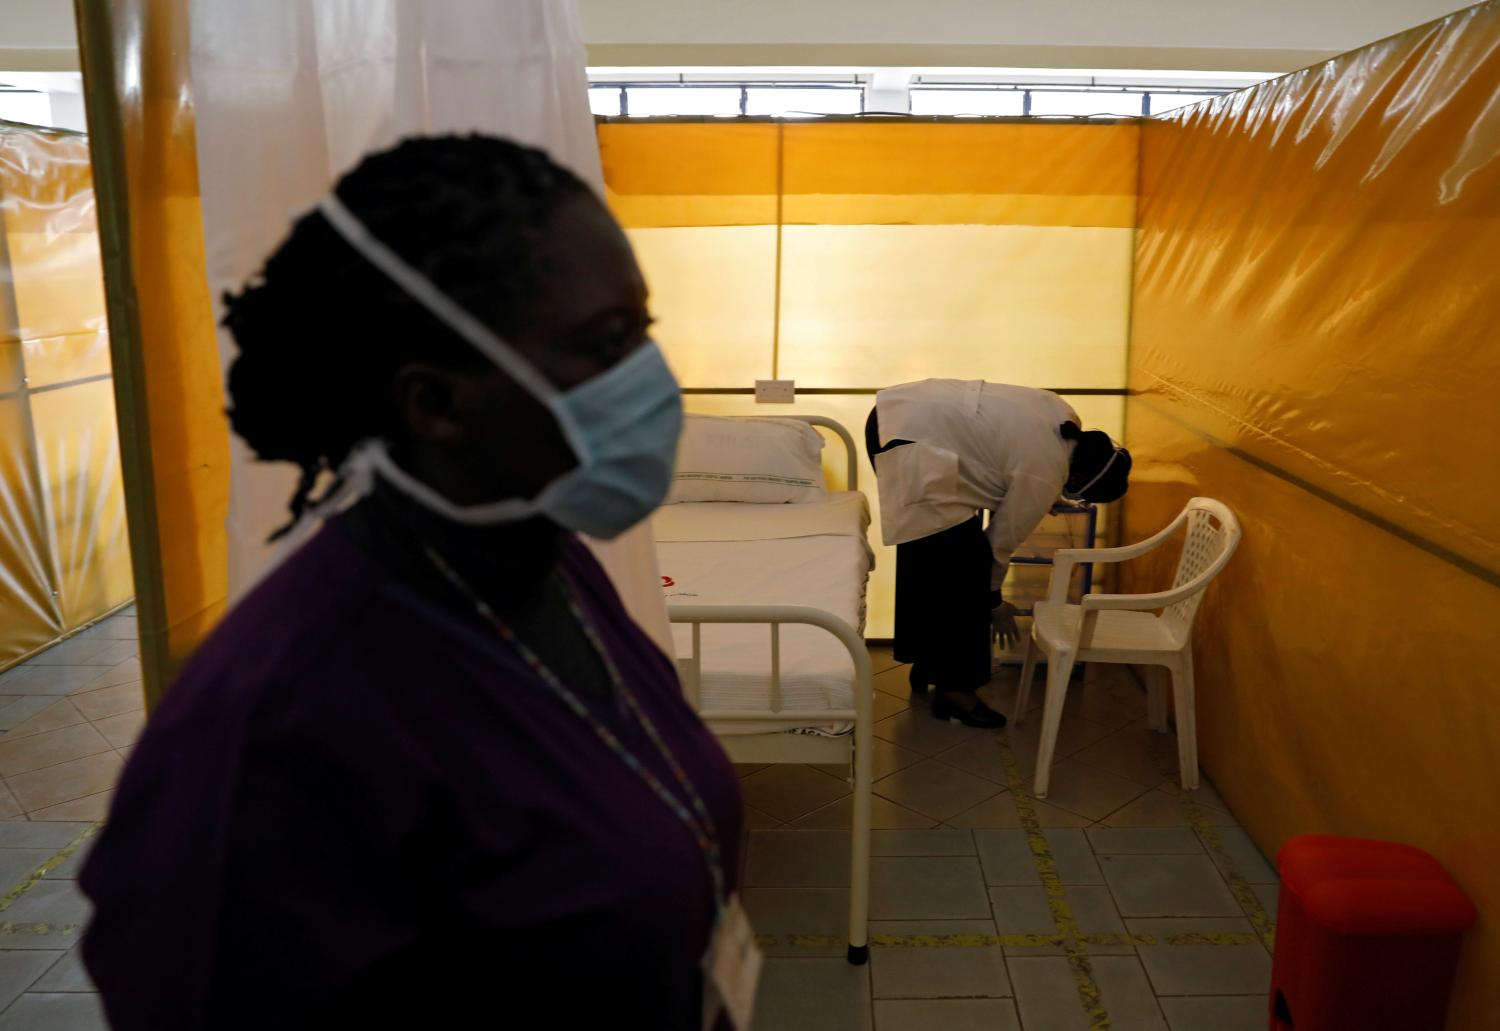 Medical staff members work at the yet to be used field hospital build to treat a large number of patients due to the spread of the coronavirus disease (COVID-19), at the Aga Khan University Hospital in Nairobi, Kenya, April 9, 2020. REUTERS/Baz Ratner